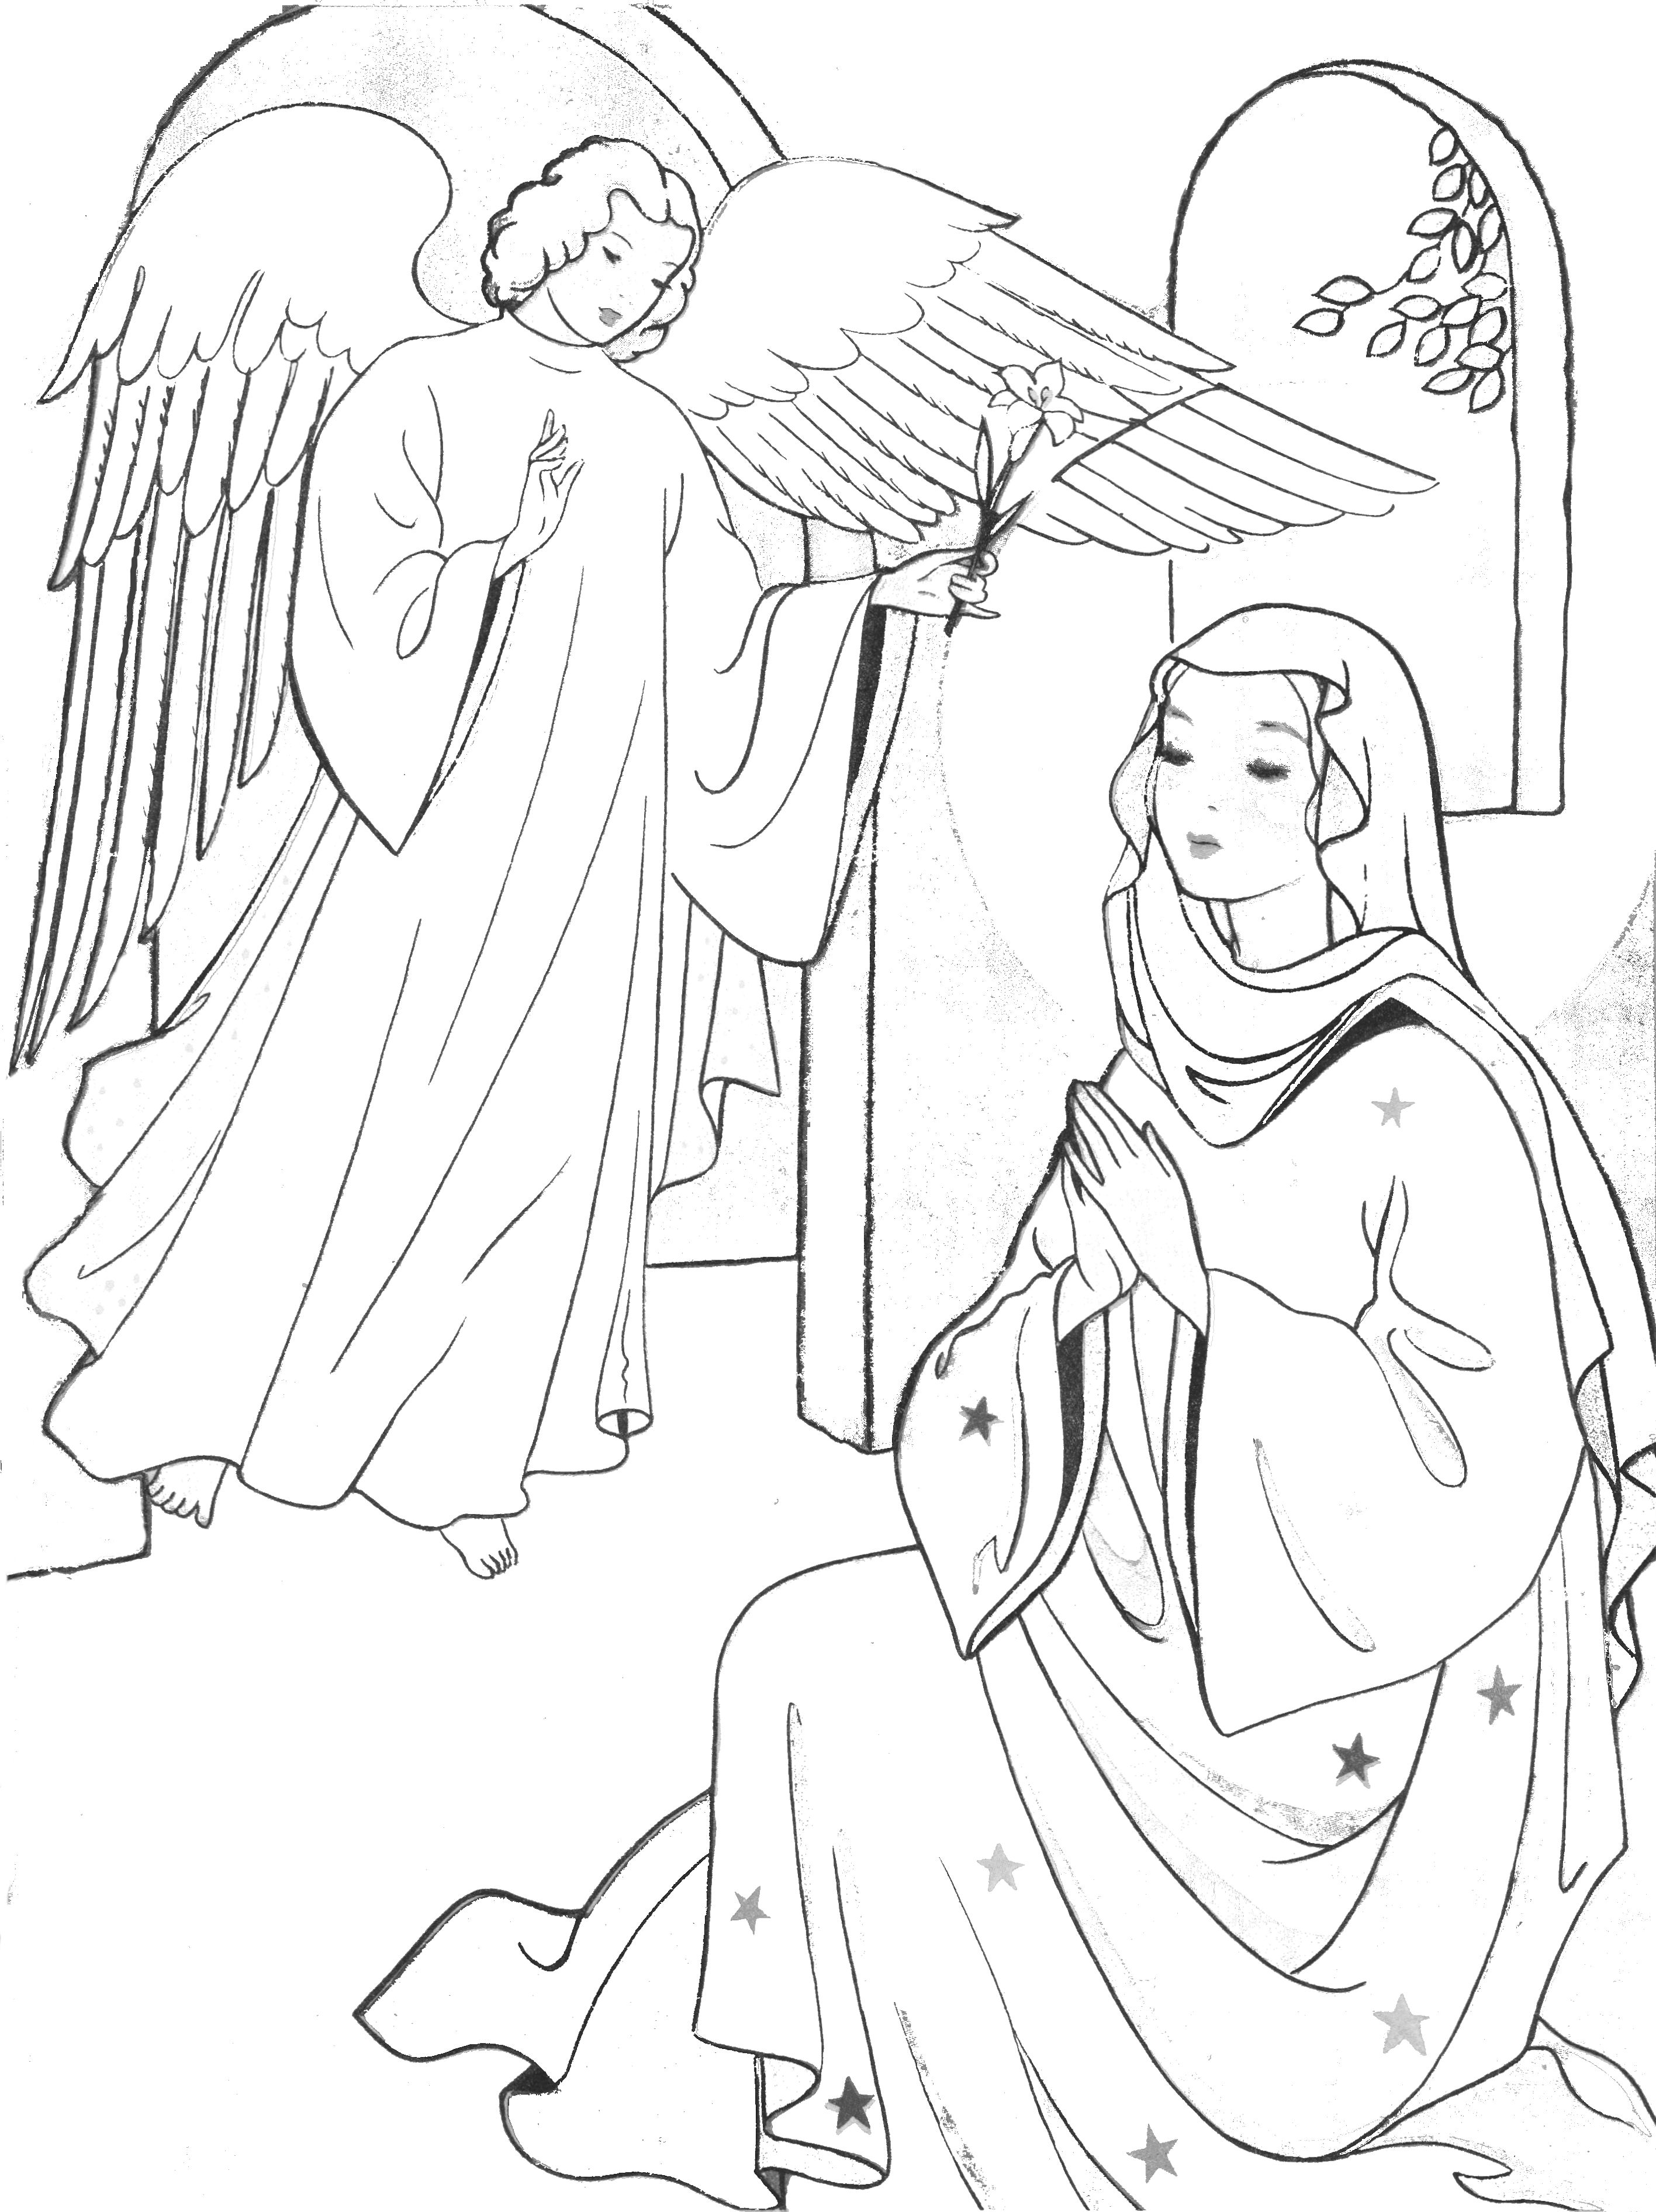 Annunciation coloring pages â family in feast and feria